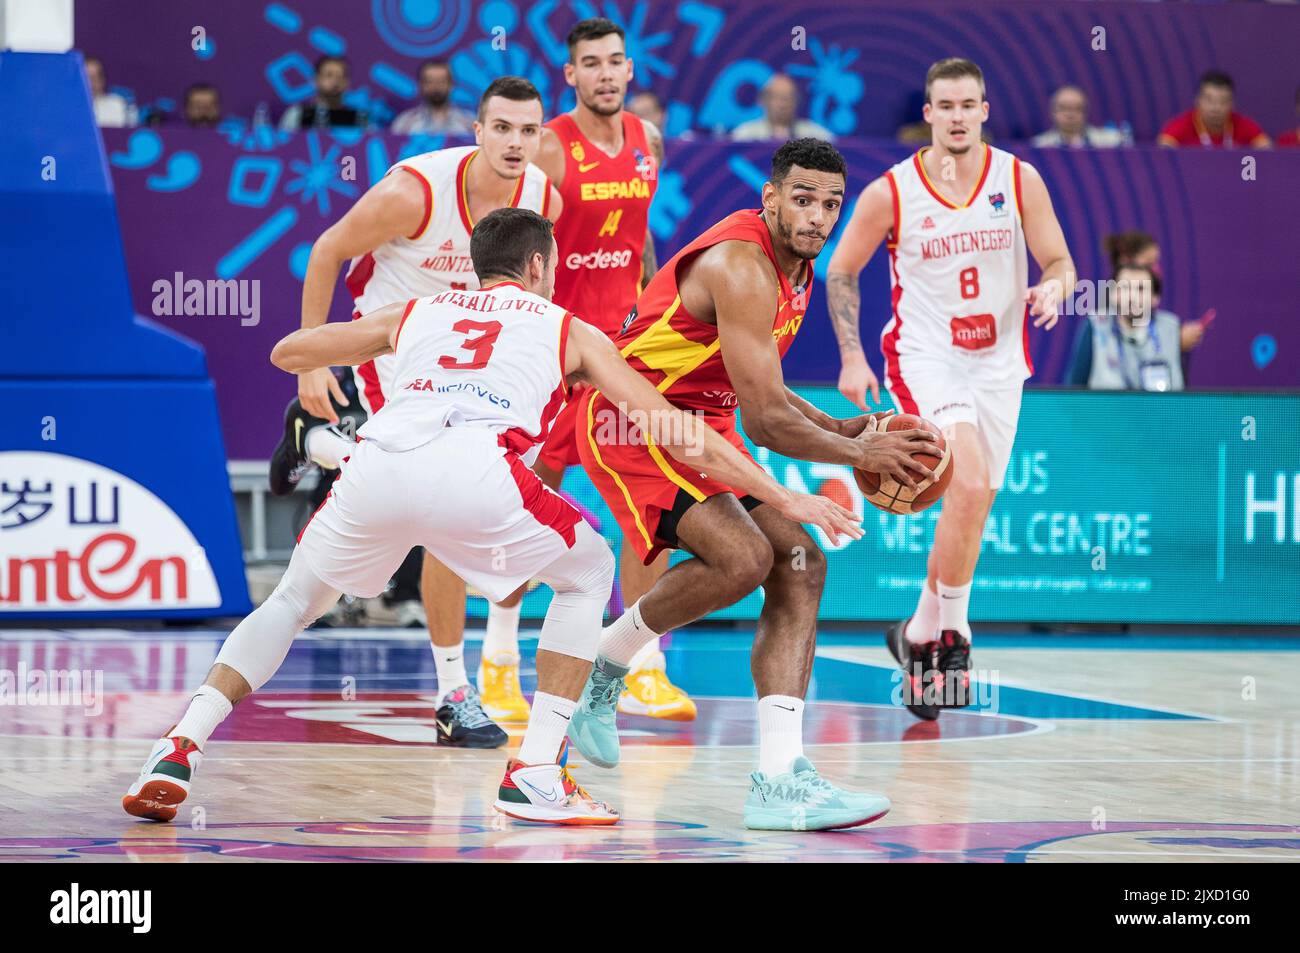 Tbilisi, Georgia, 6th September 2022. Sebastian Saiz of Spain in action during the FIBA EuroBasket 2022 group A match between Montenegro and Spain at Tbilisi Arena in Tbilisi, Georgia. September 6, 2022. Credit: Nikola Krstic/Alamy Stock Photo